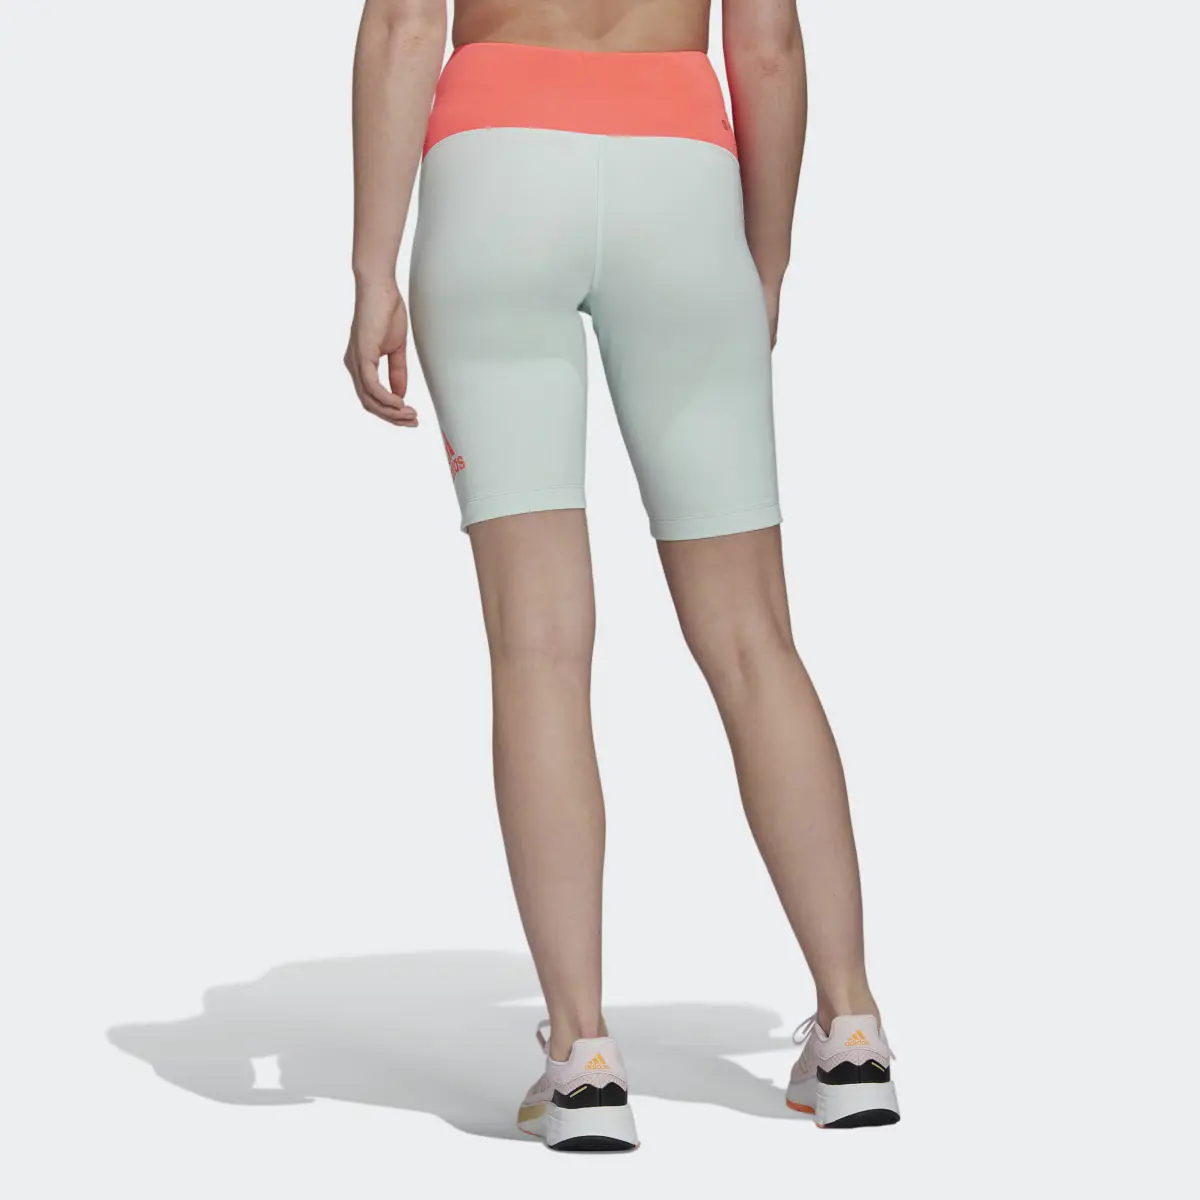 Adidas Designed to Move Colorblock Short Sport Tights. 2